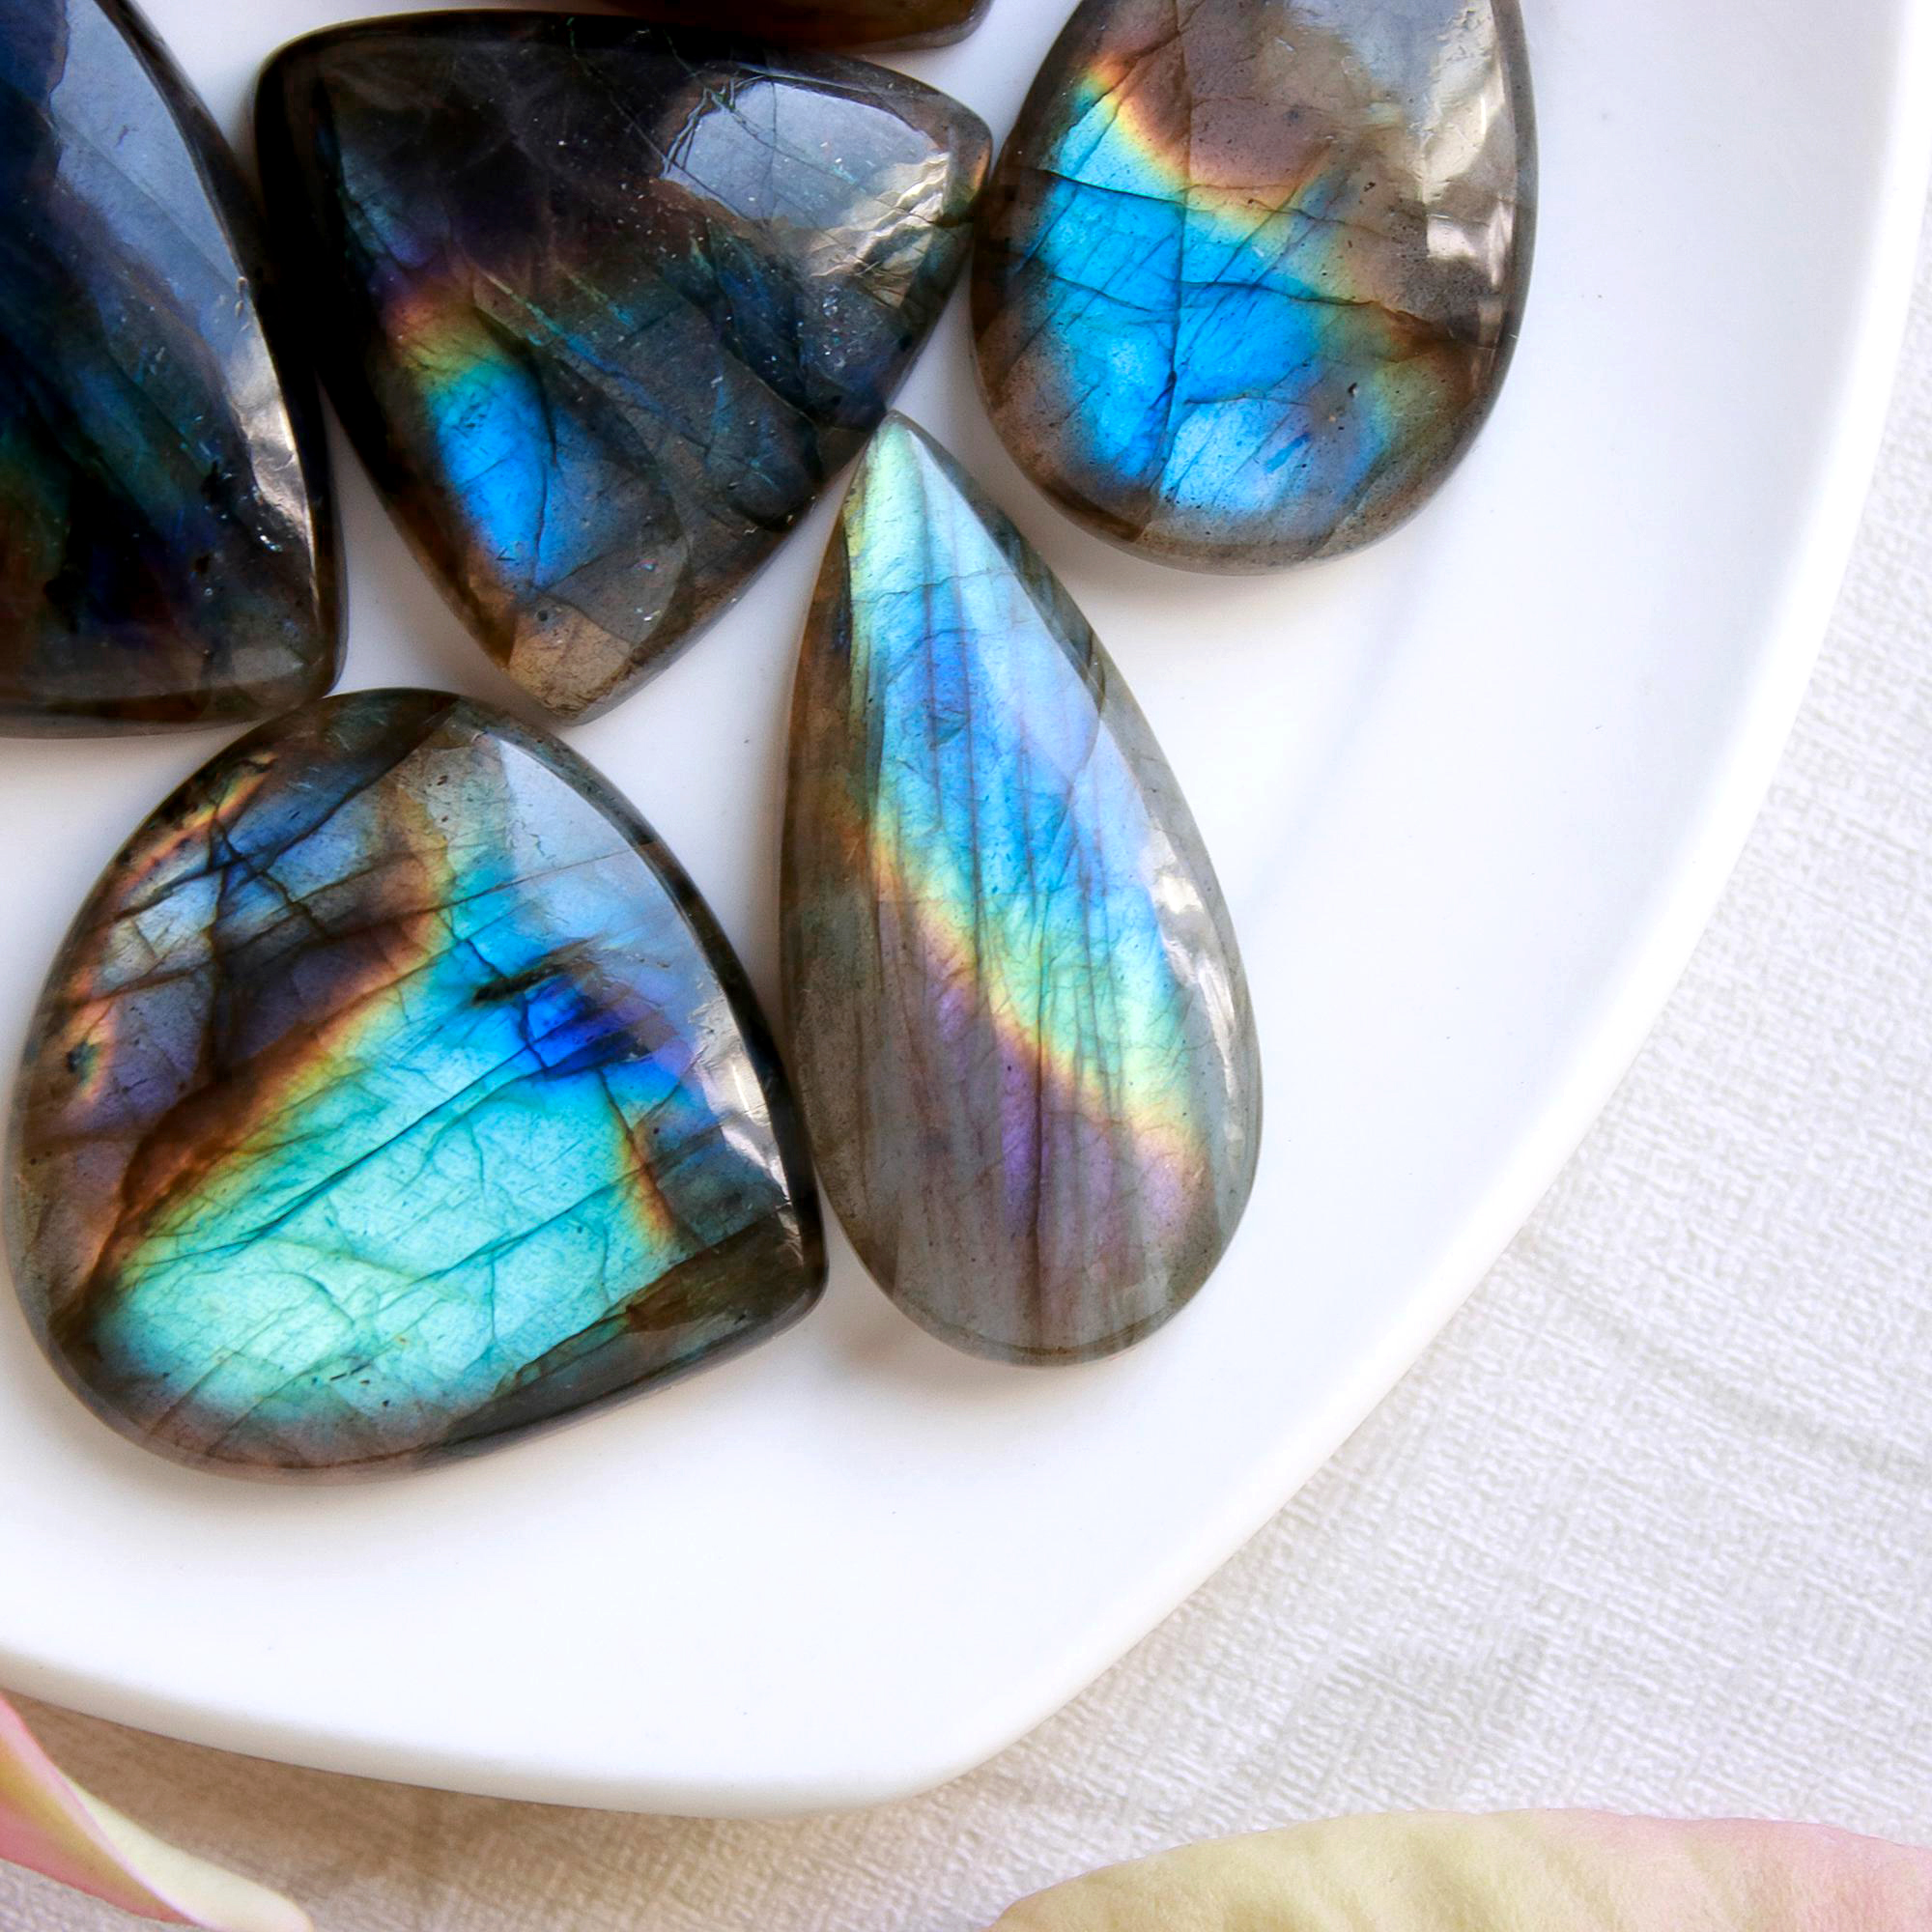 9 Pcs.213 Cts Natural labradorite Cabochon Loose Gemstone For Jewelry Wholesale Lot Size 31x15 20x14mm